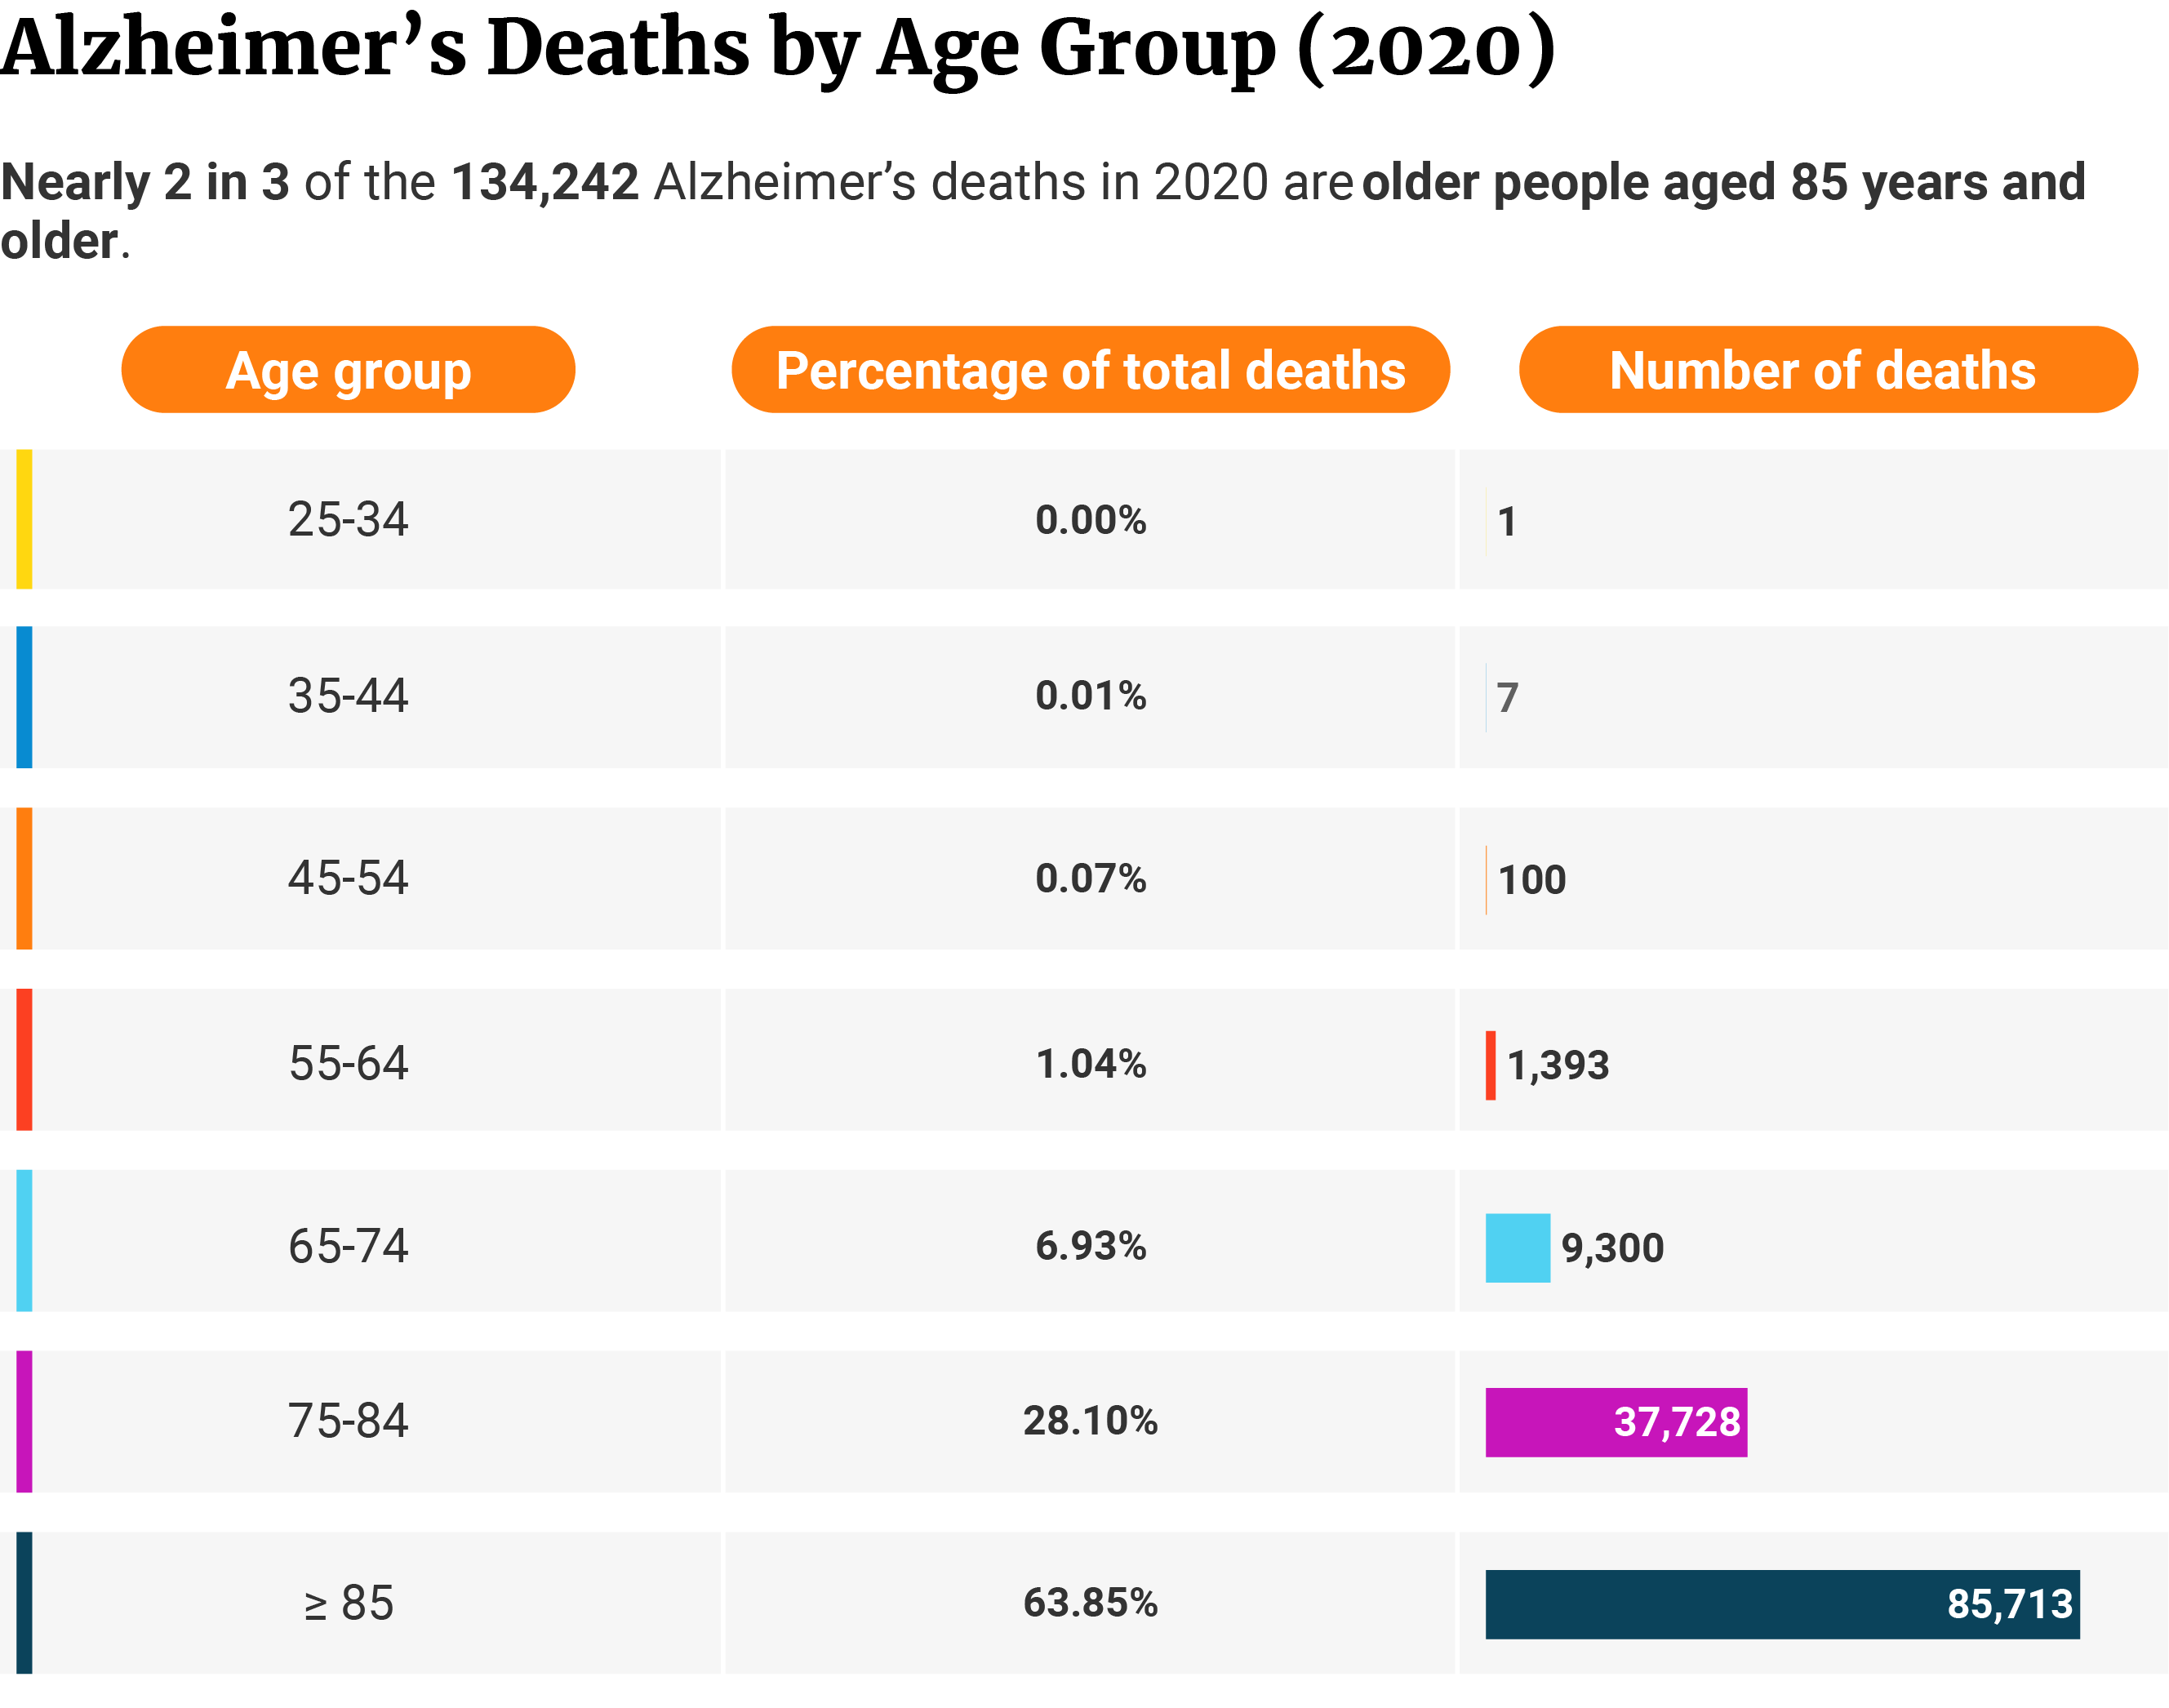 Table showing 63.85% of Alzheimer’s deaths in 2020 are people over 85 years with 85,713, 28.10% are people aged 75-84 with 37,728, 6.93% are people aged 65-74 with 9,300, 1.04% are people aged 55-64 with 1,393, and the rest are people younger than 54 with 108.